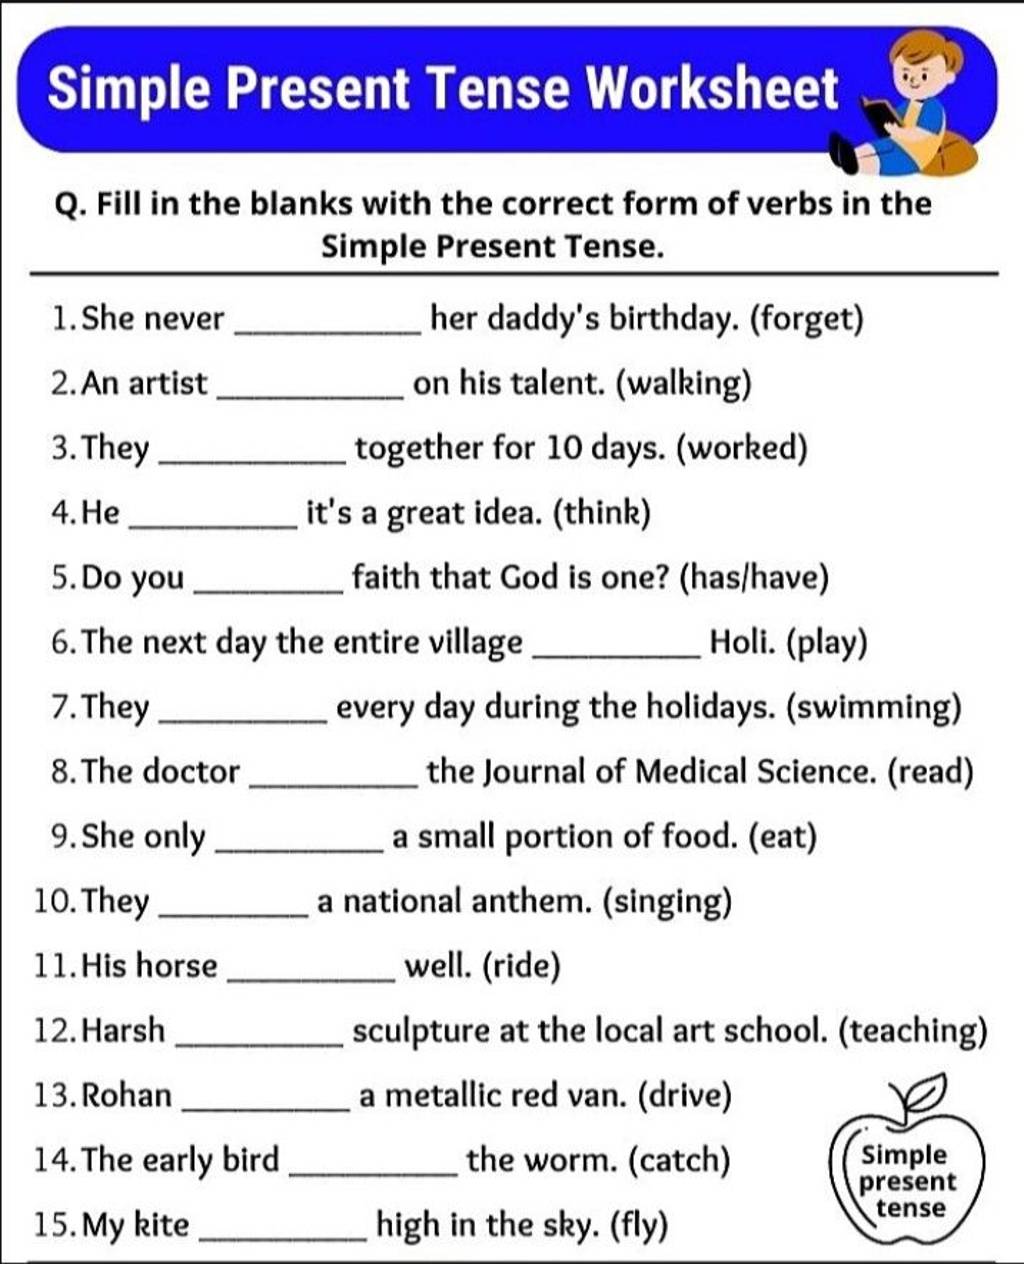 Simple Present Tense Worksheet Q. Fill in the blanks with the correct for..